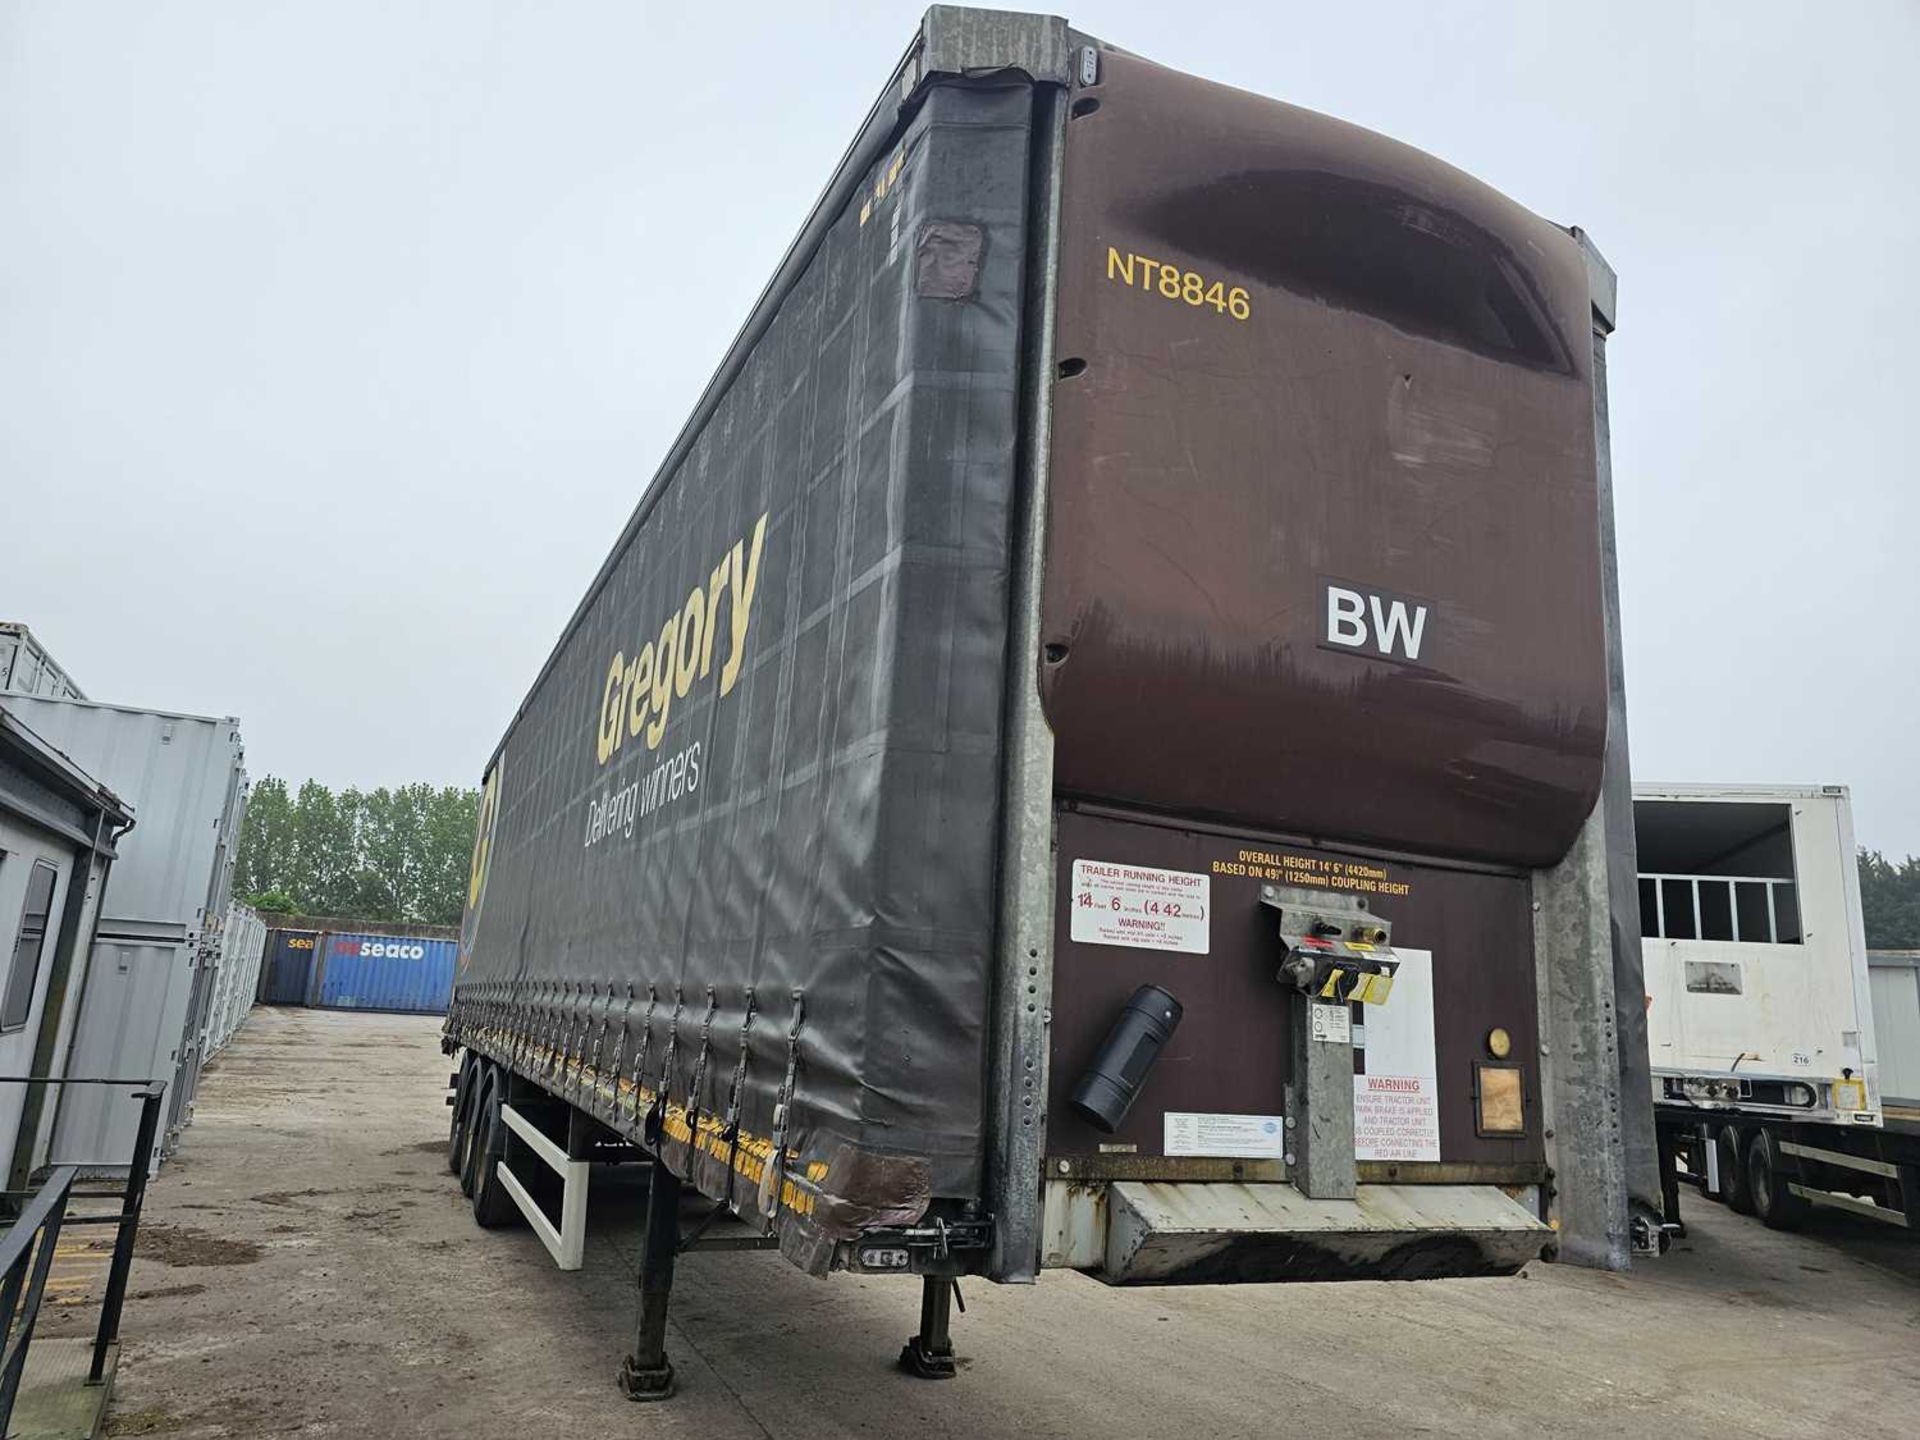 2013 Cartwright CTA.39A Tri Axle Curtainsider Trailer (Includes Contents) - Image 4 of 12